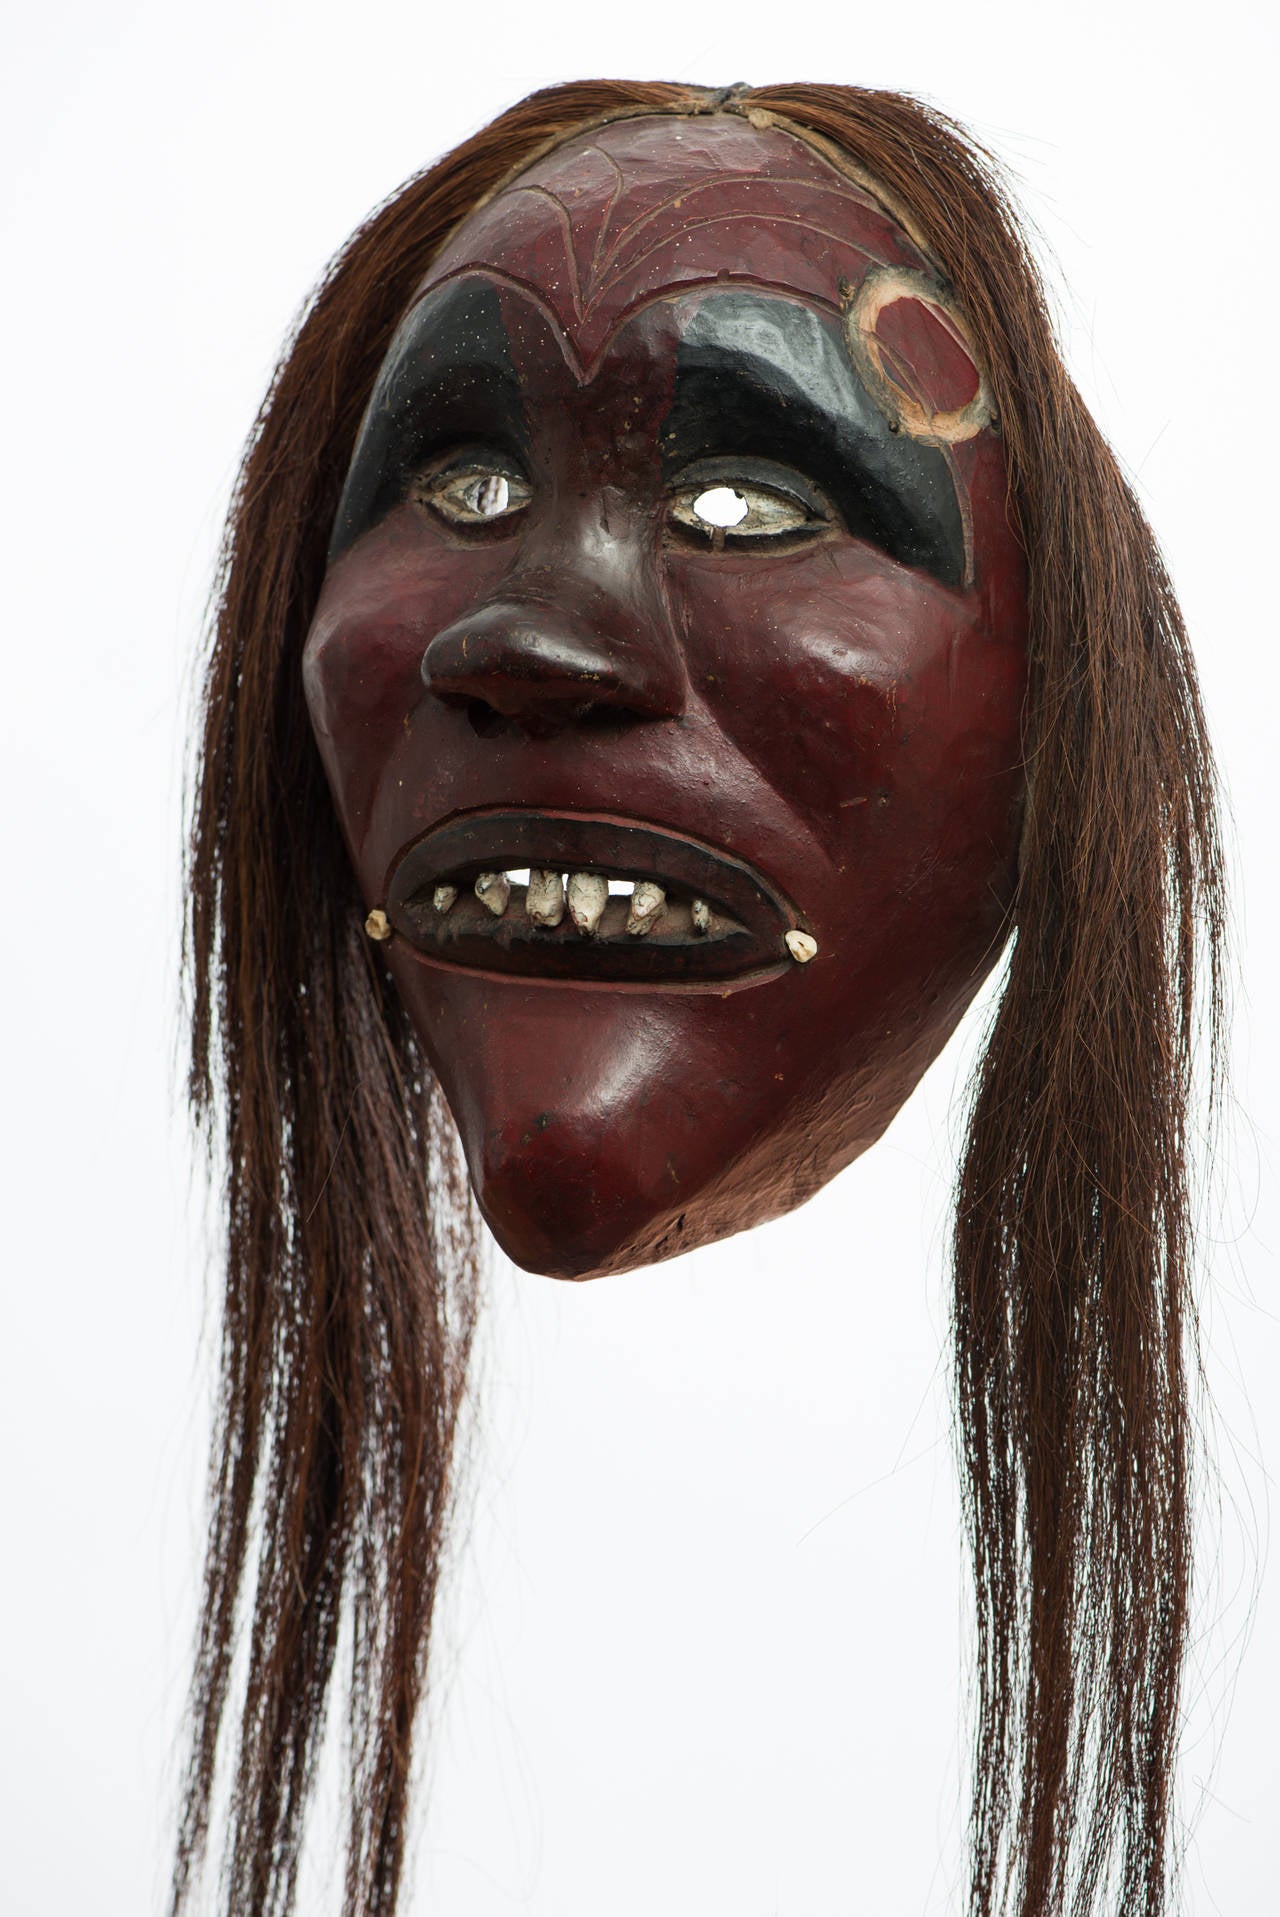 False face society mask.

Region/Tribe: Western New York State/Iroquois,
circa second half of the 19th century.
Material: basswood, horsehair, iron nails, inset teeth, red and black pigment.
Condition: Overall excellent, missing horns, no